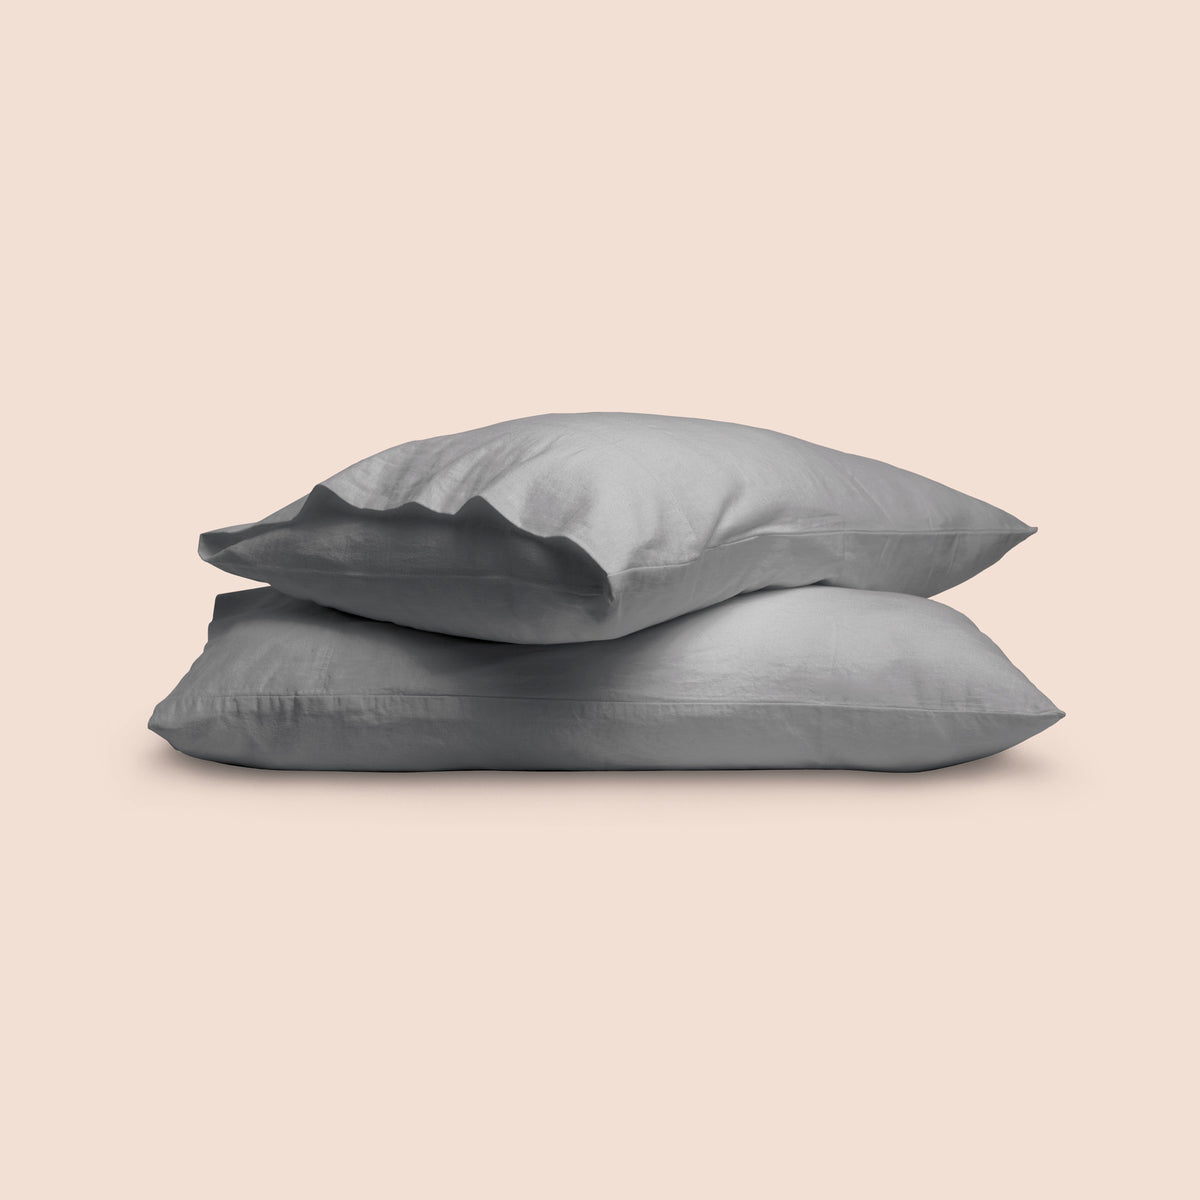 Image of two pillows with Stone Gray Blended Linen Pillowcases stacked on top of each other on a light pink background. The top pillow is showcasing an enveloping feature. 